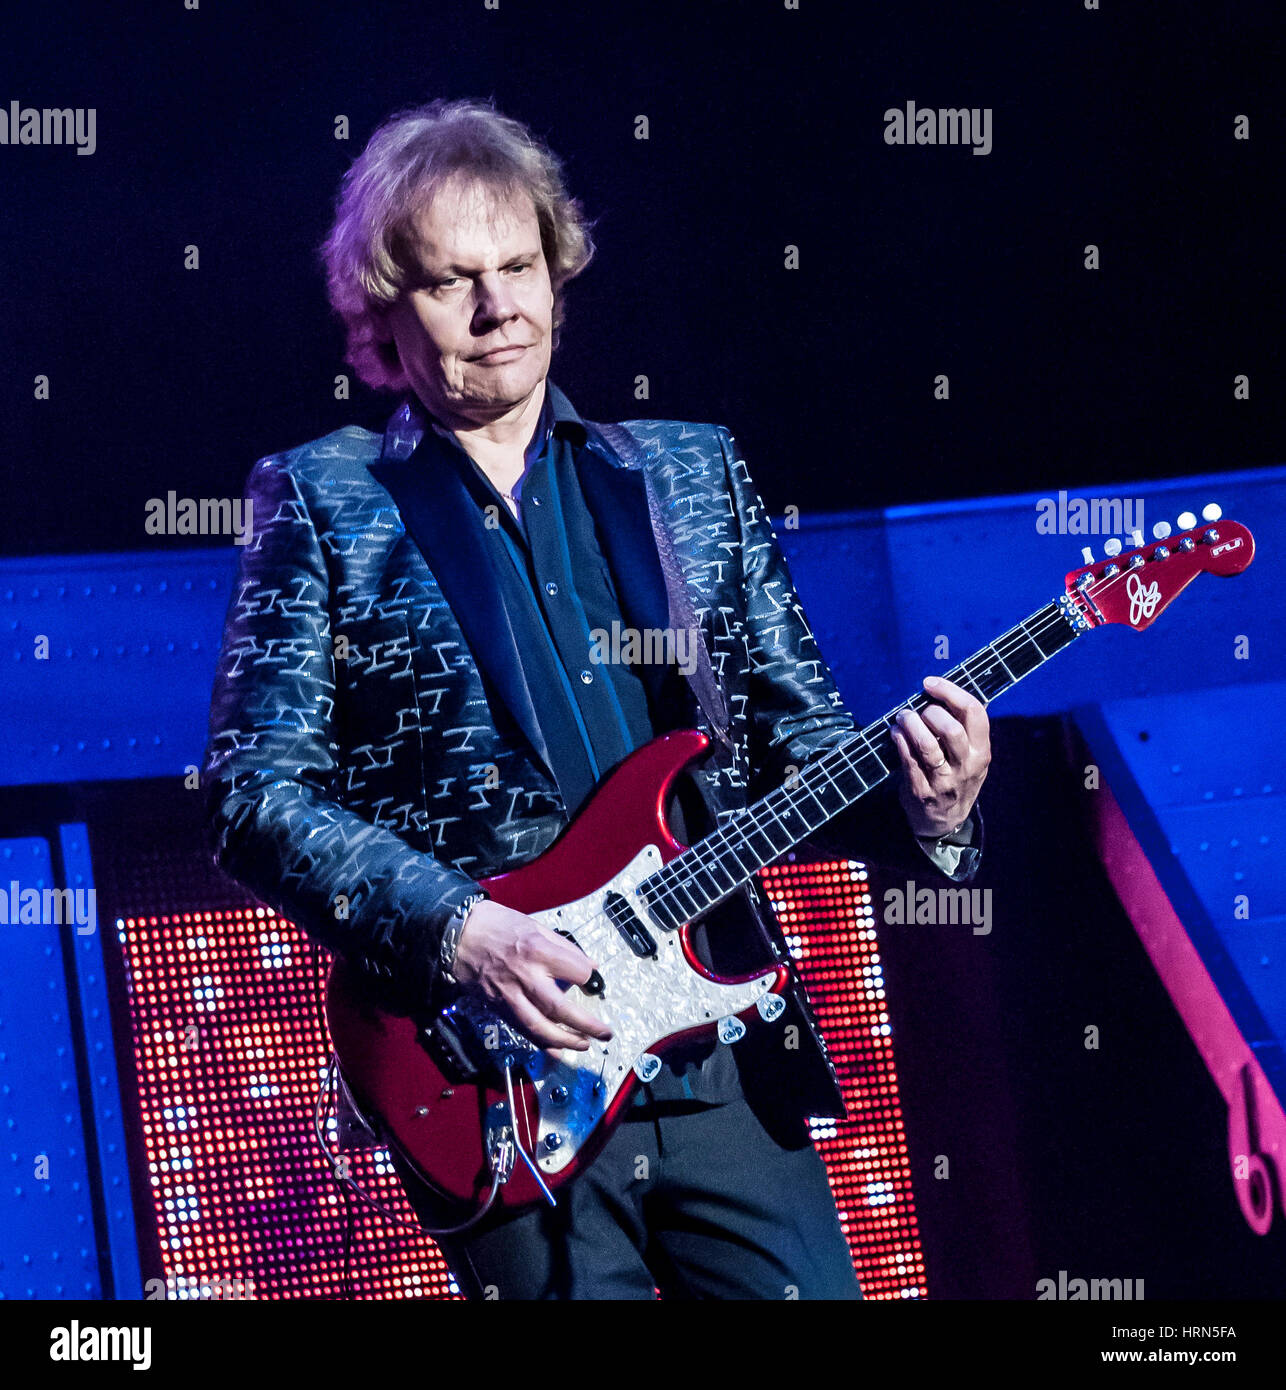 Costa Mesa, California, USA. 15th June, 2016. JAMES YOUNG Guitar for Styx 2016 Tour plays at the Pacific Amphitheater to a near sold out show. Credit: Dave Safley/ZUMA Wire/Alamy Live News Stock Photo